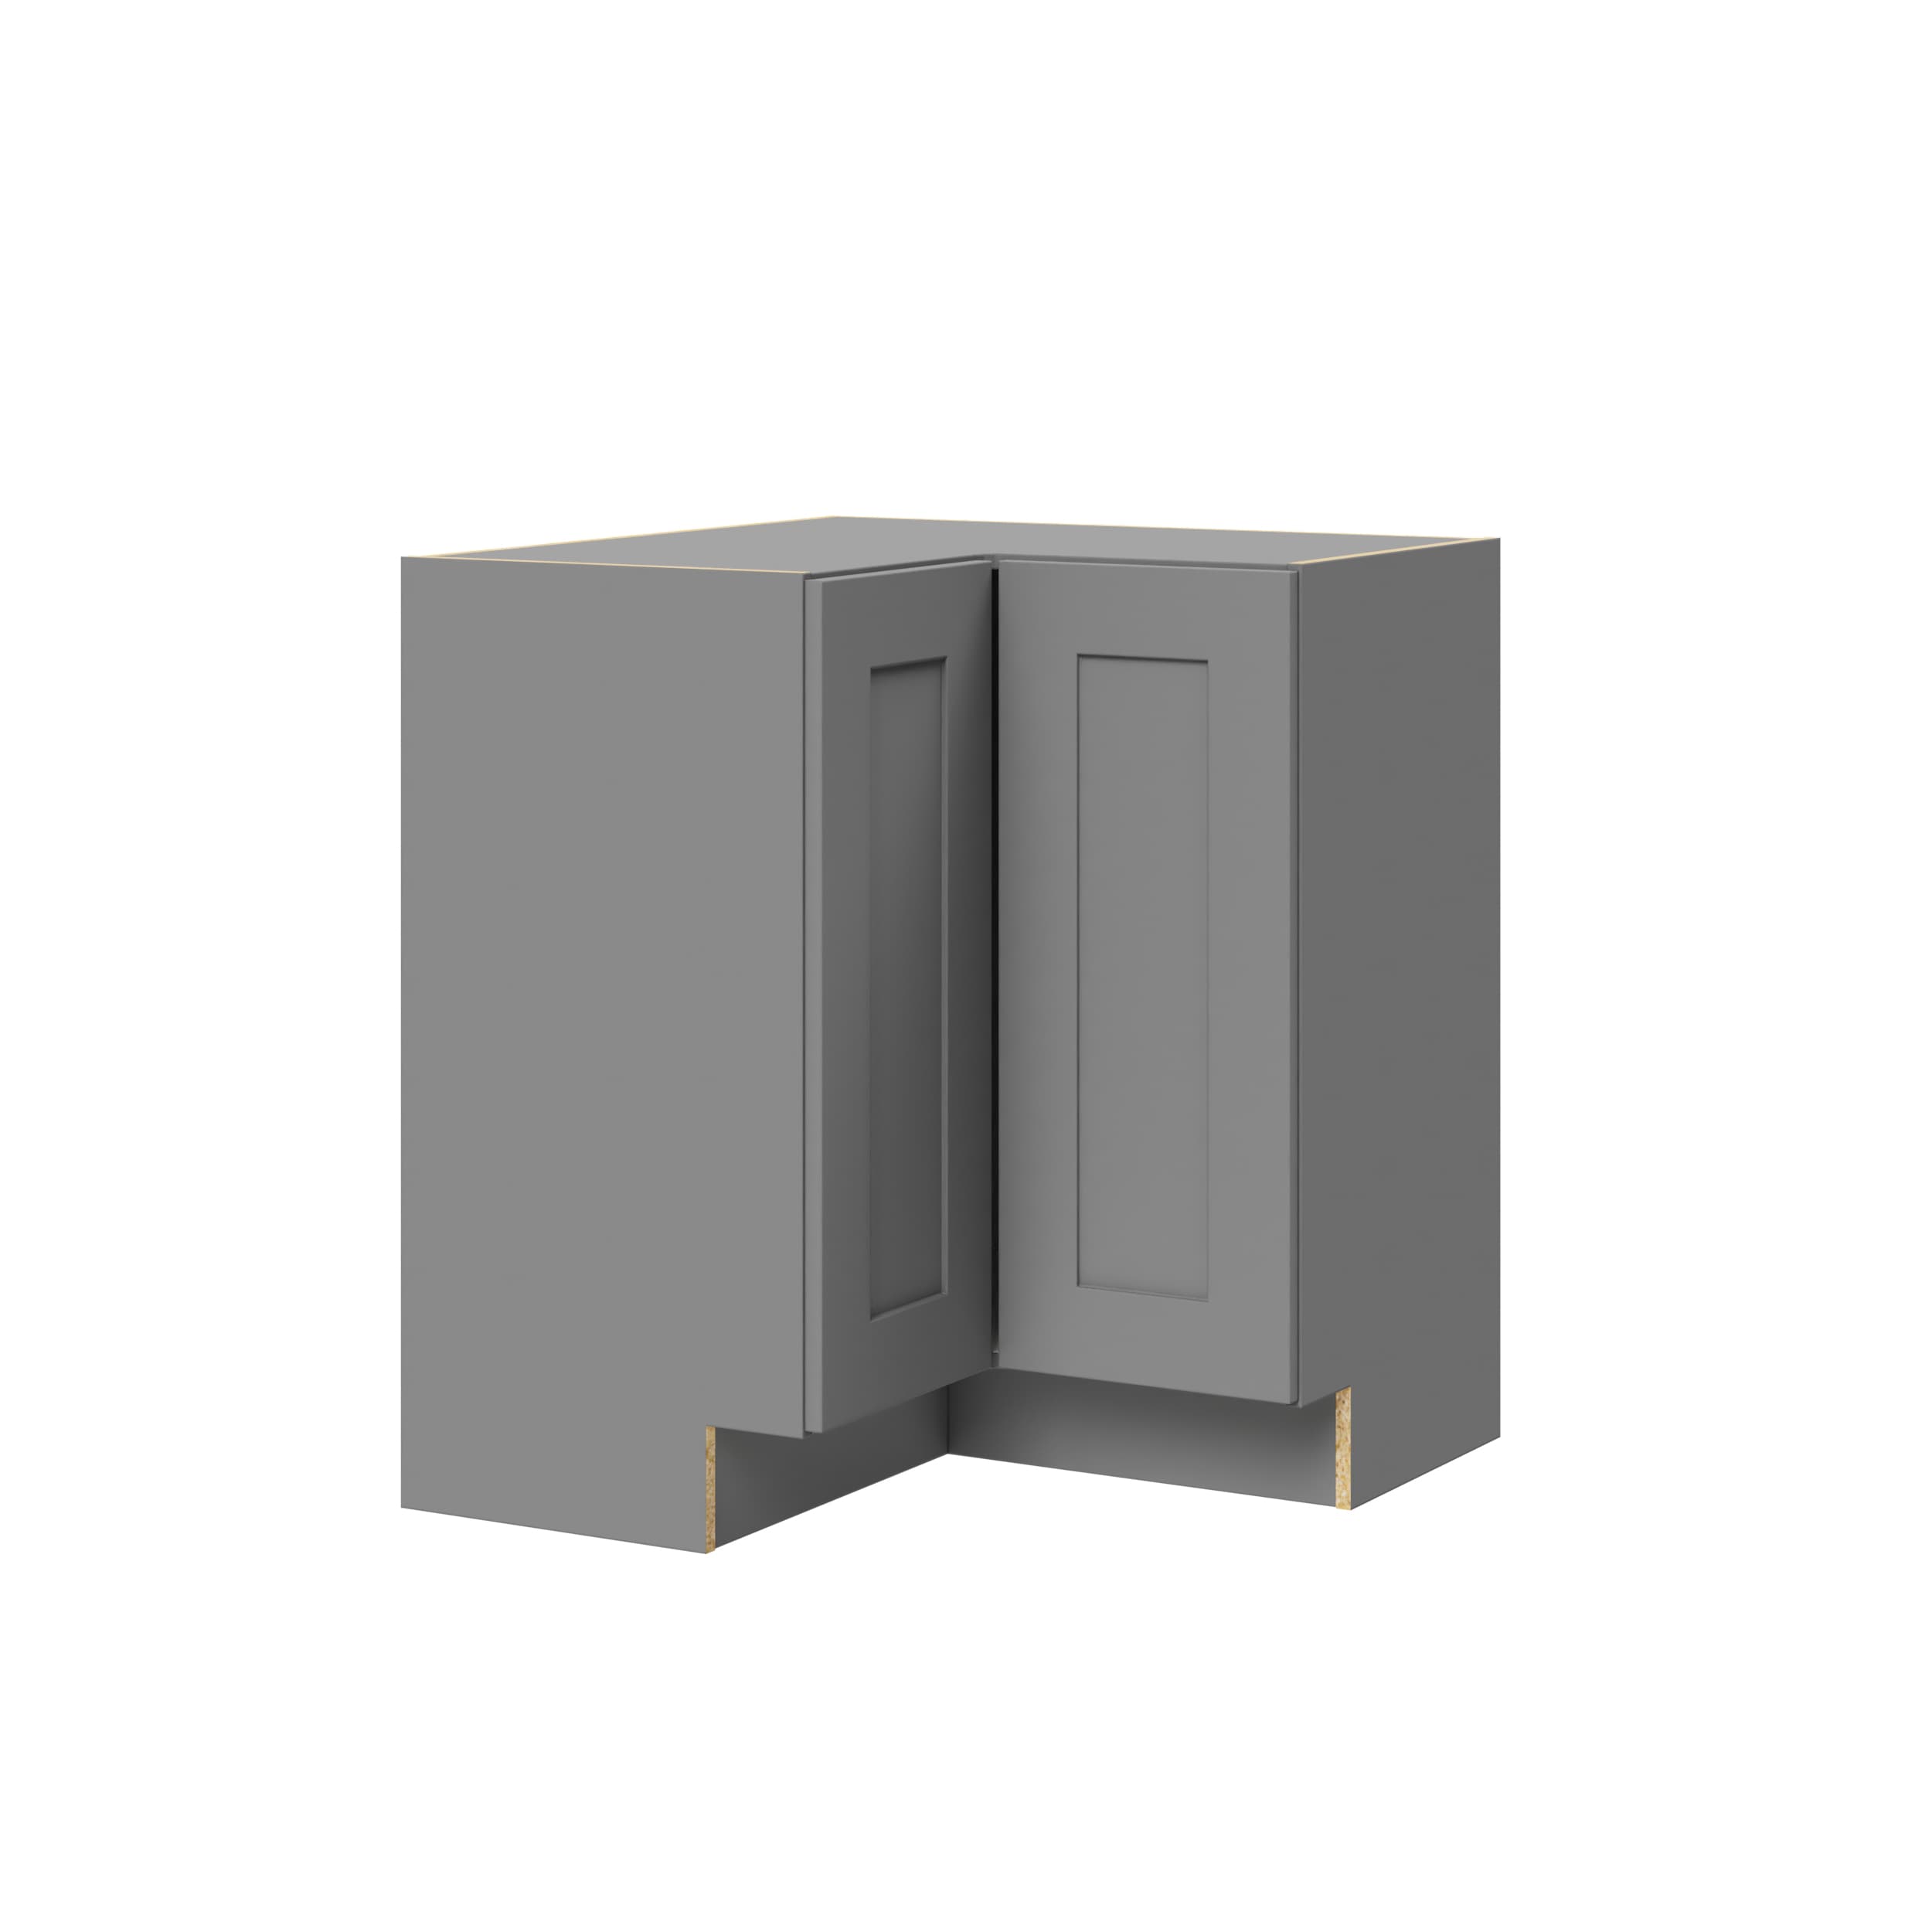 Hugo&Borg Laval 30-in D Door Assembled x Style) Susan Shaker x Gray W H Base (Recessed Lazy Cabinet 34.5-in at 30.8-in Laval Fully Panel Corner